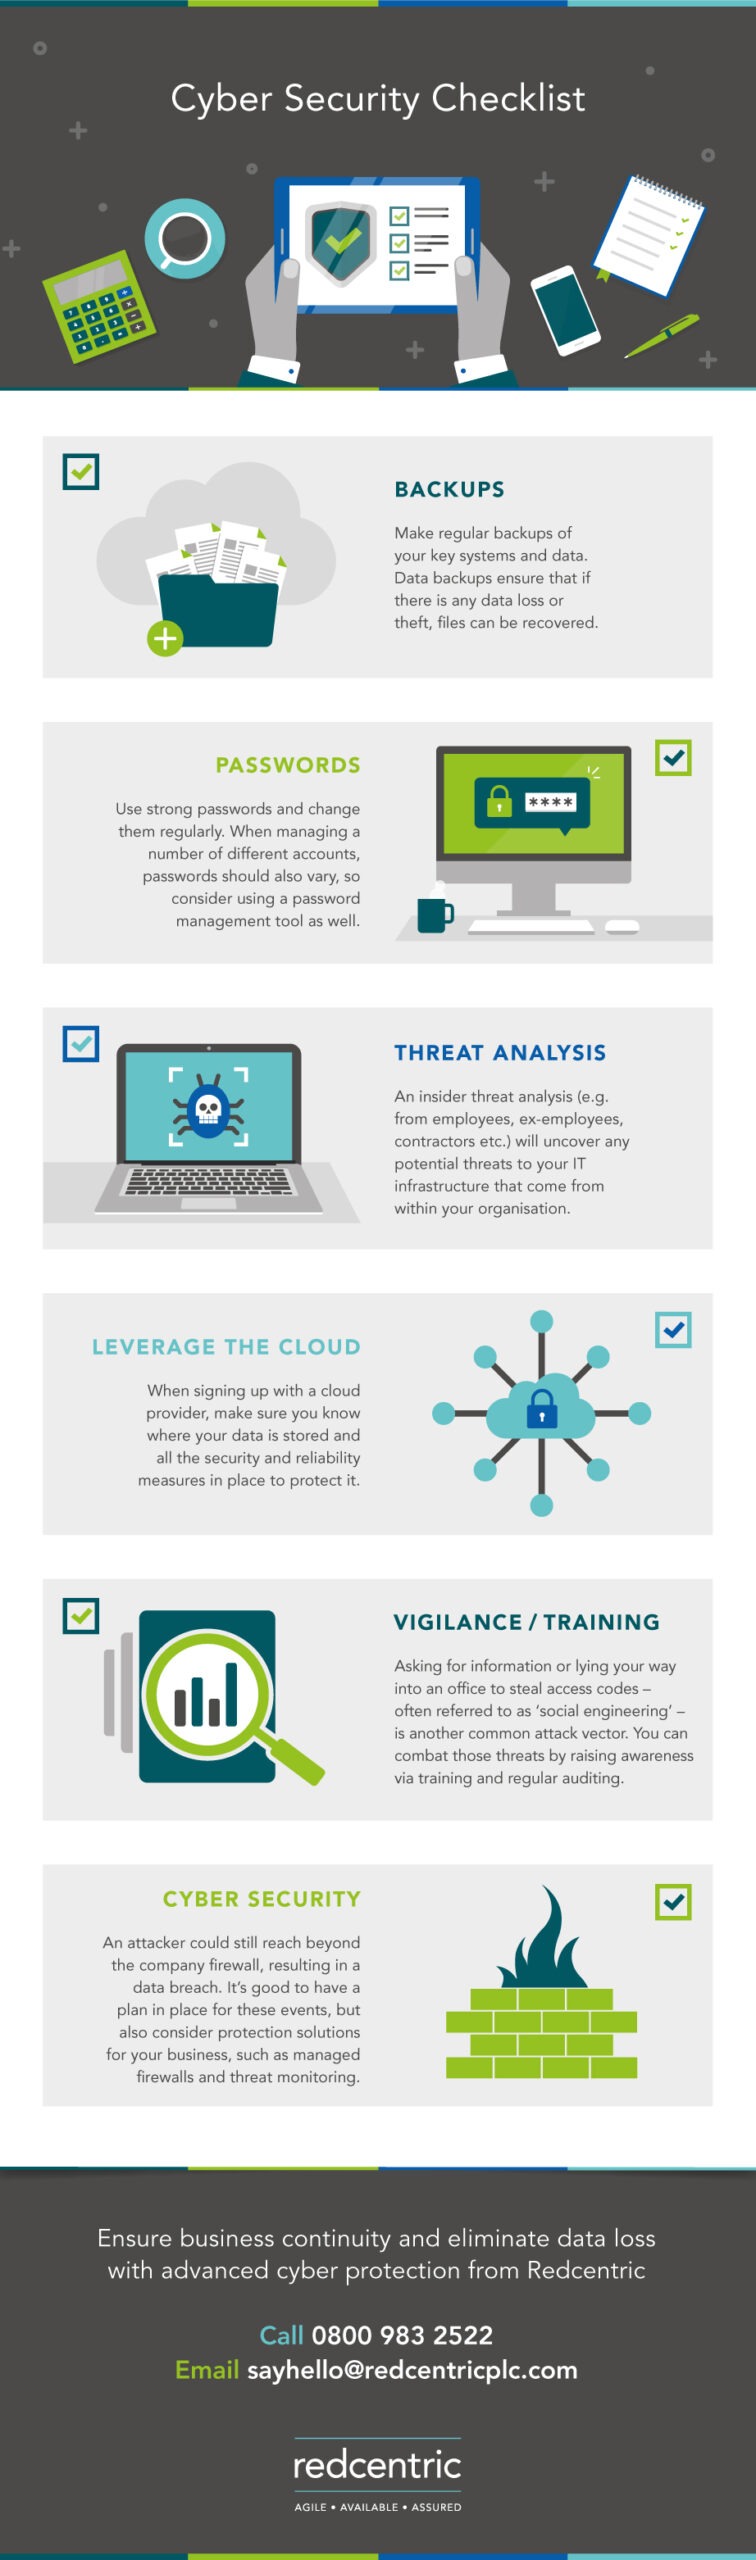 Cyber Security Checklist infographic